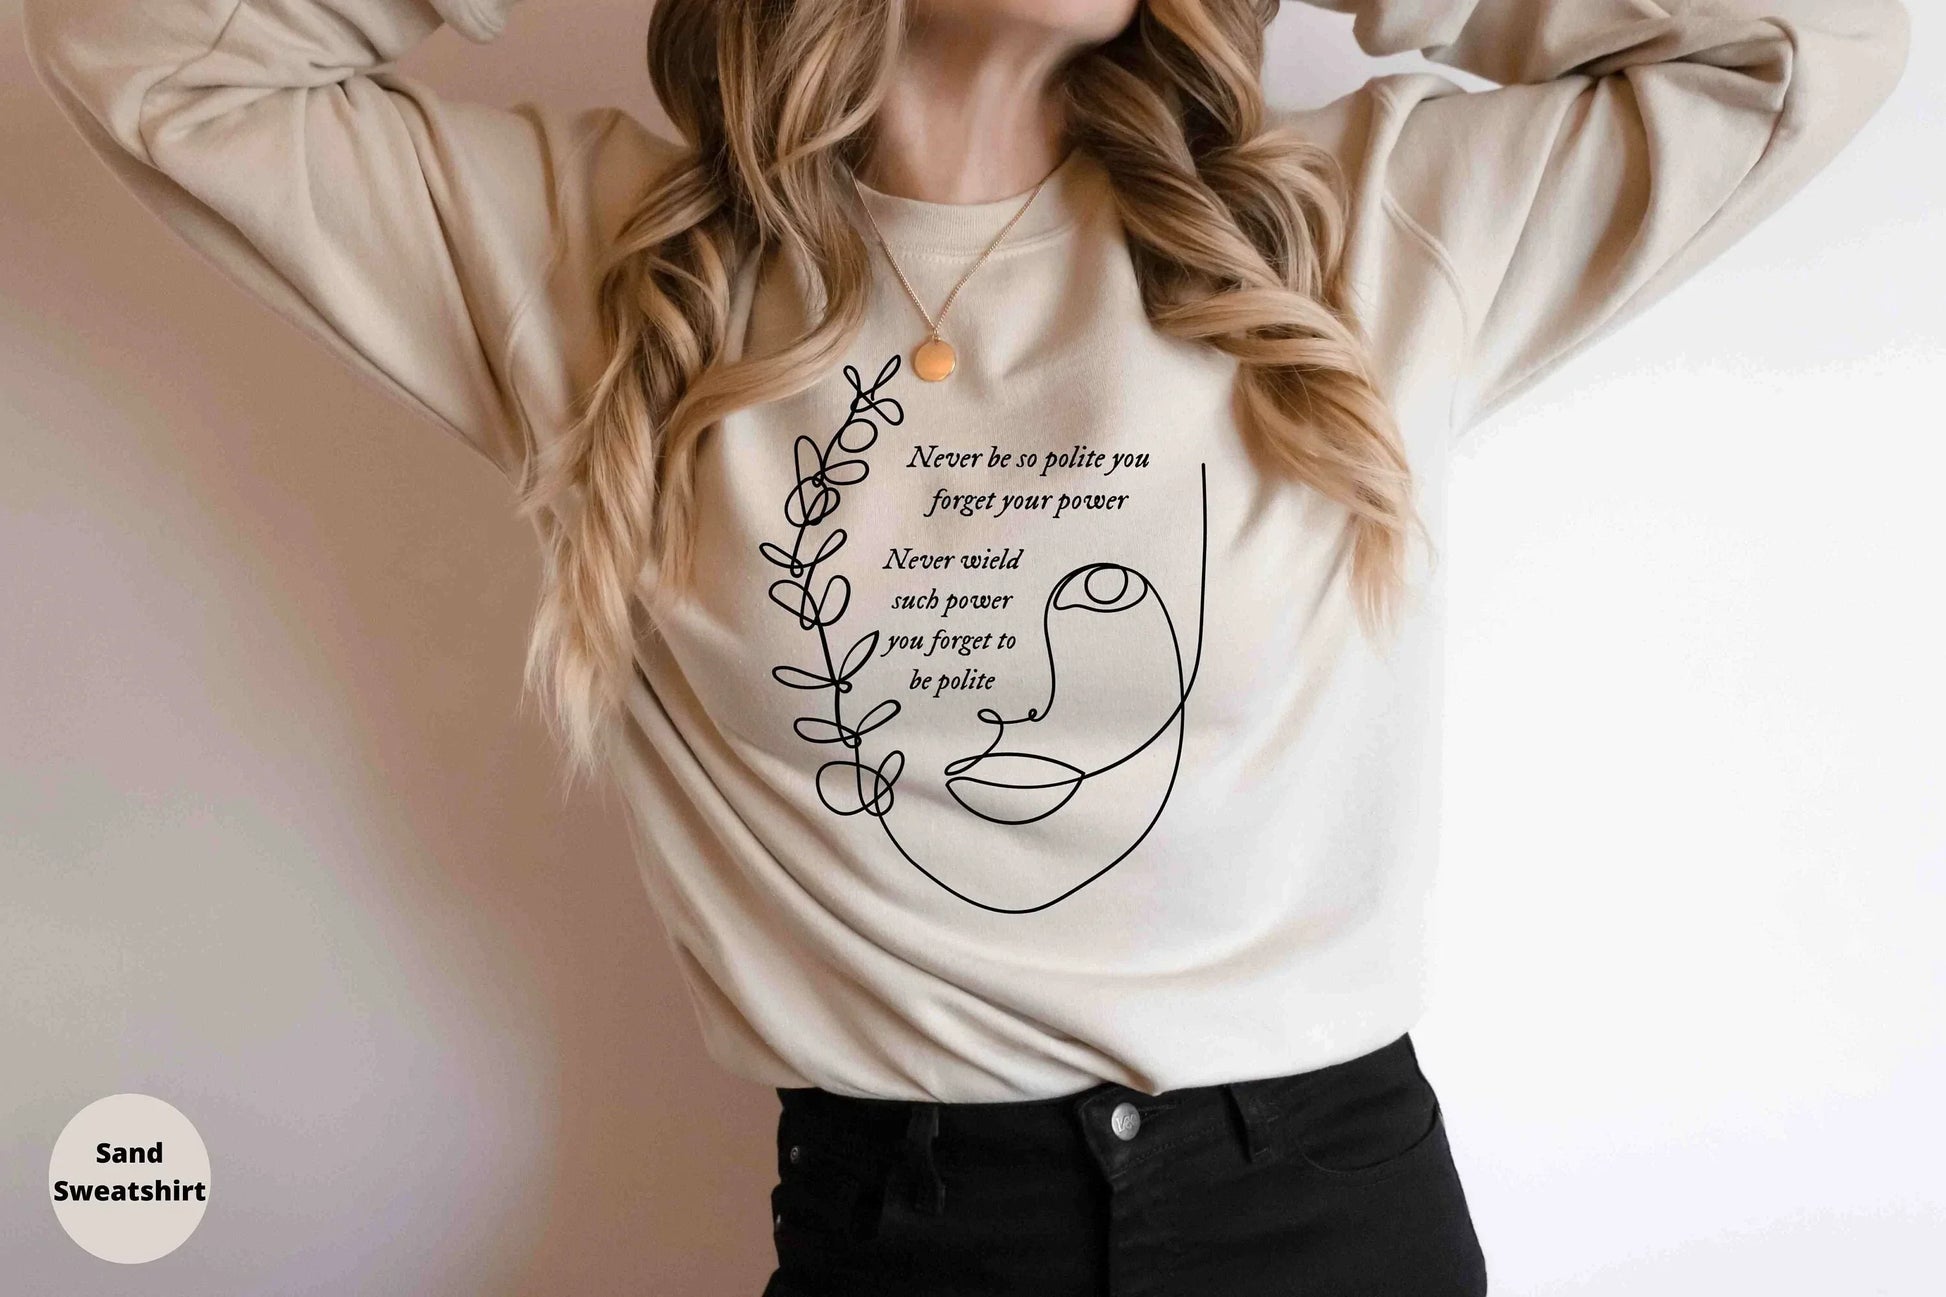 Taylor Line Art Shirt, Minimalist Sweatshirt, Fall Crewneck, Mindset Sweater, Never Forget Your Power and Remain Polite, Gift for Teenager HMDesignStudioUS